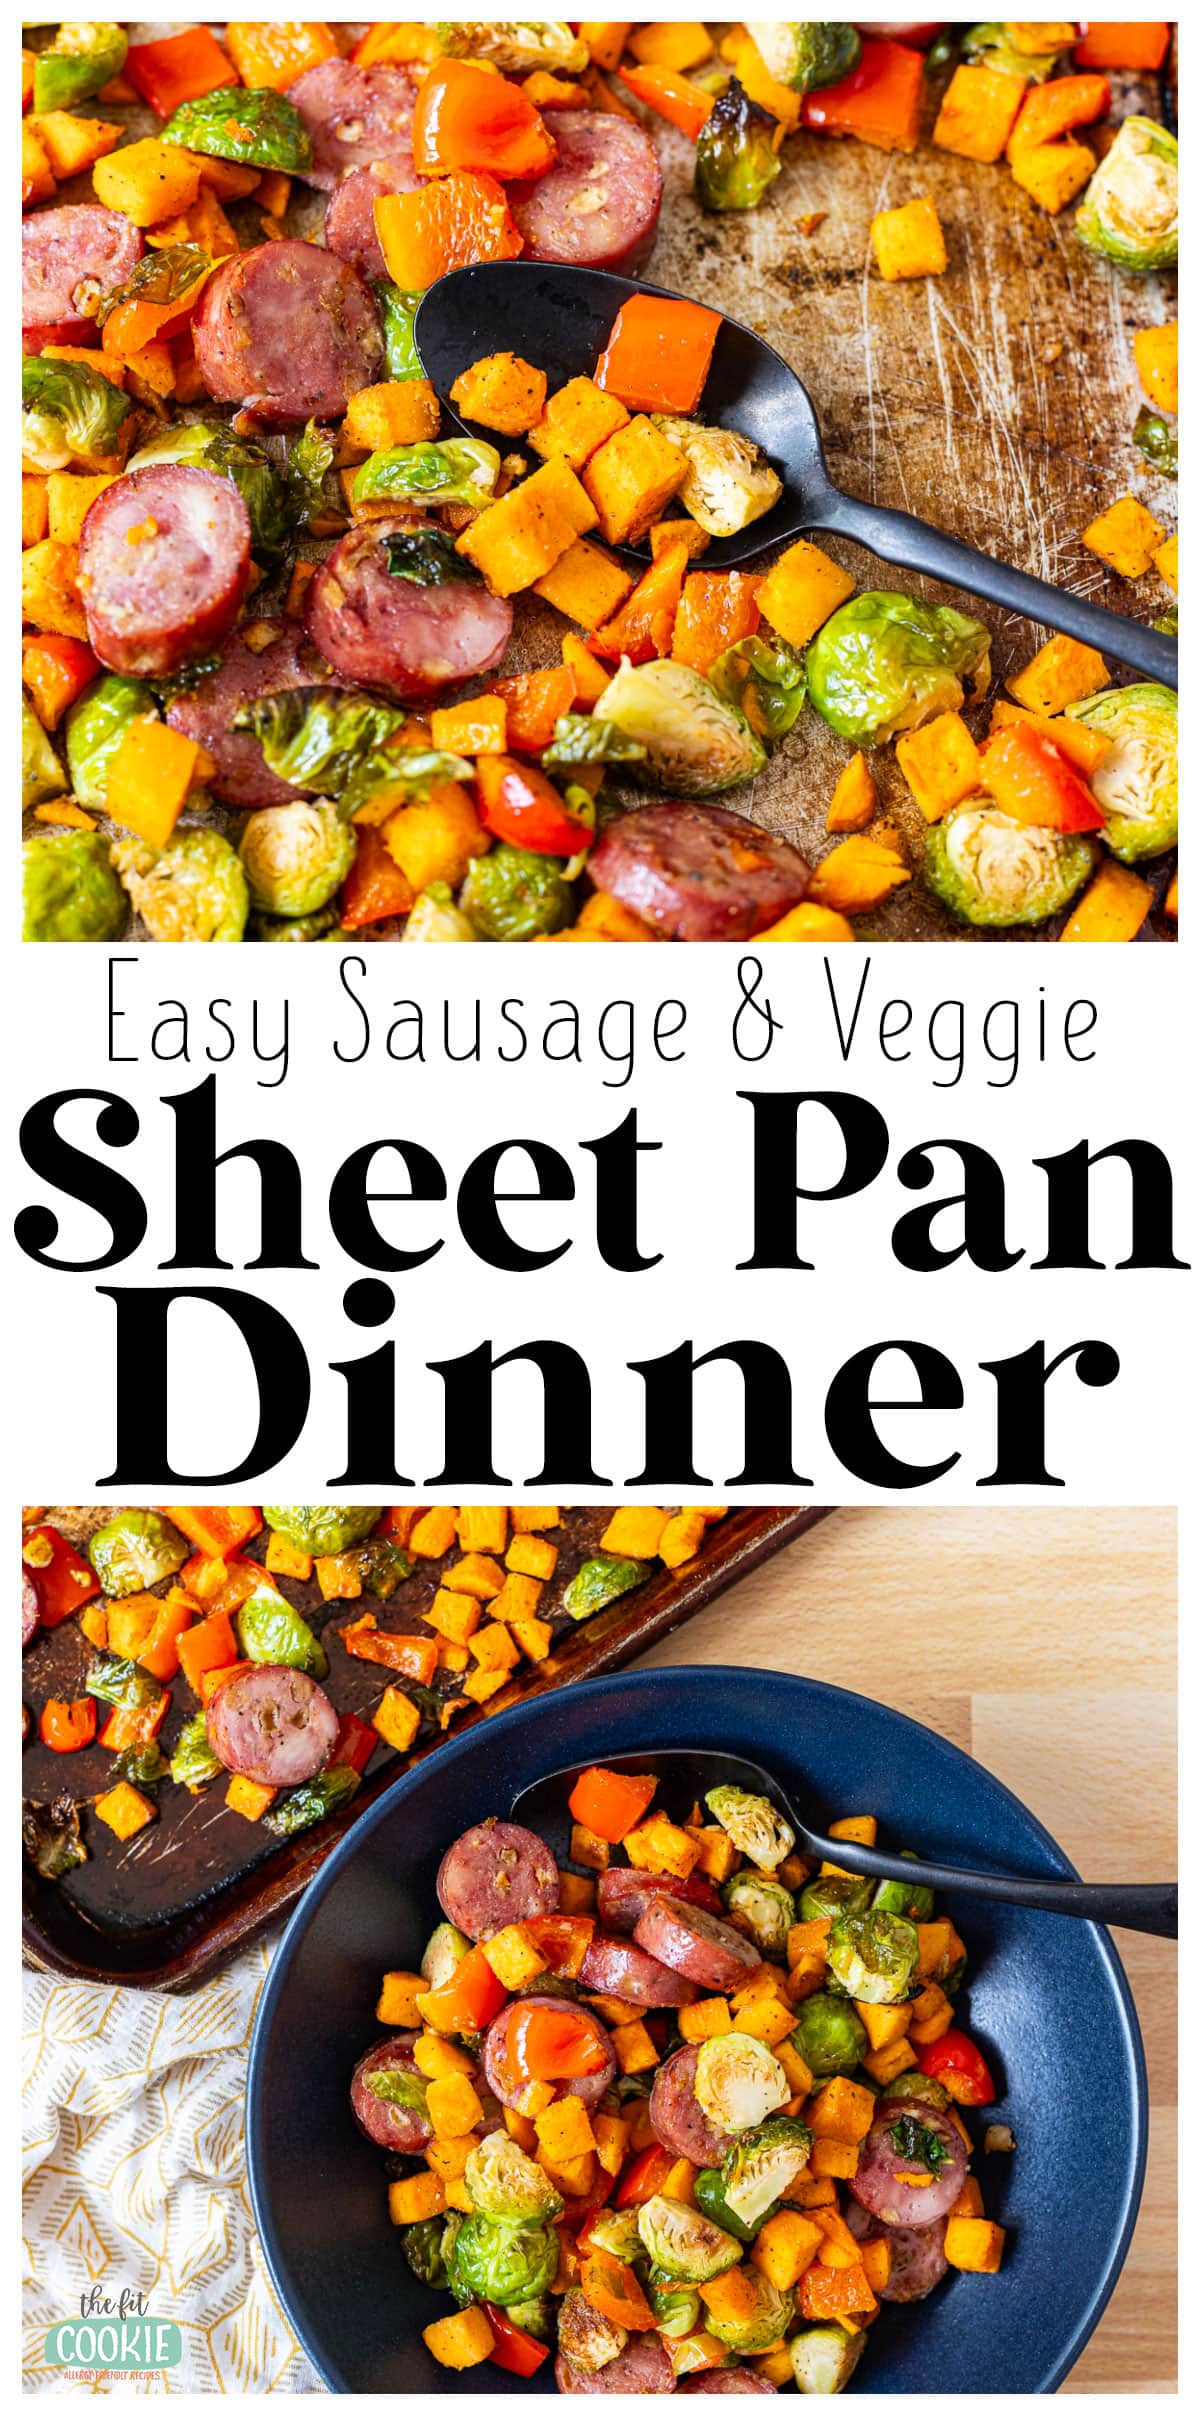 photo collage showing different views of easy sausage and veggie sheet pan dinner.